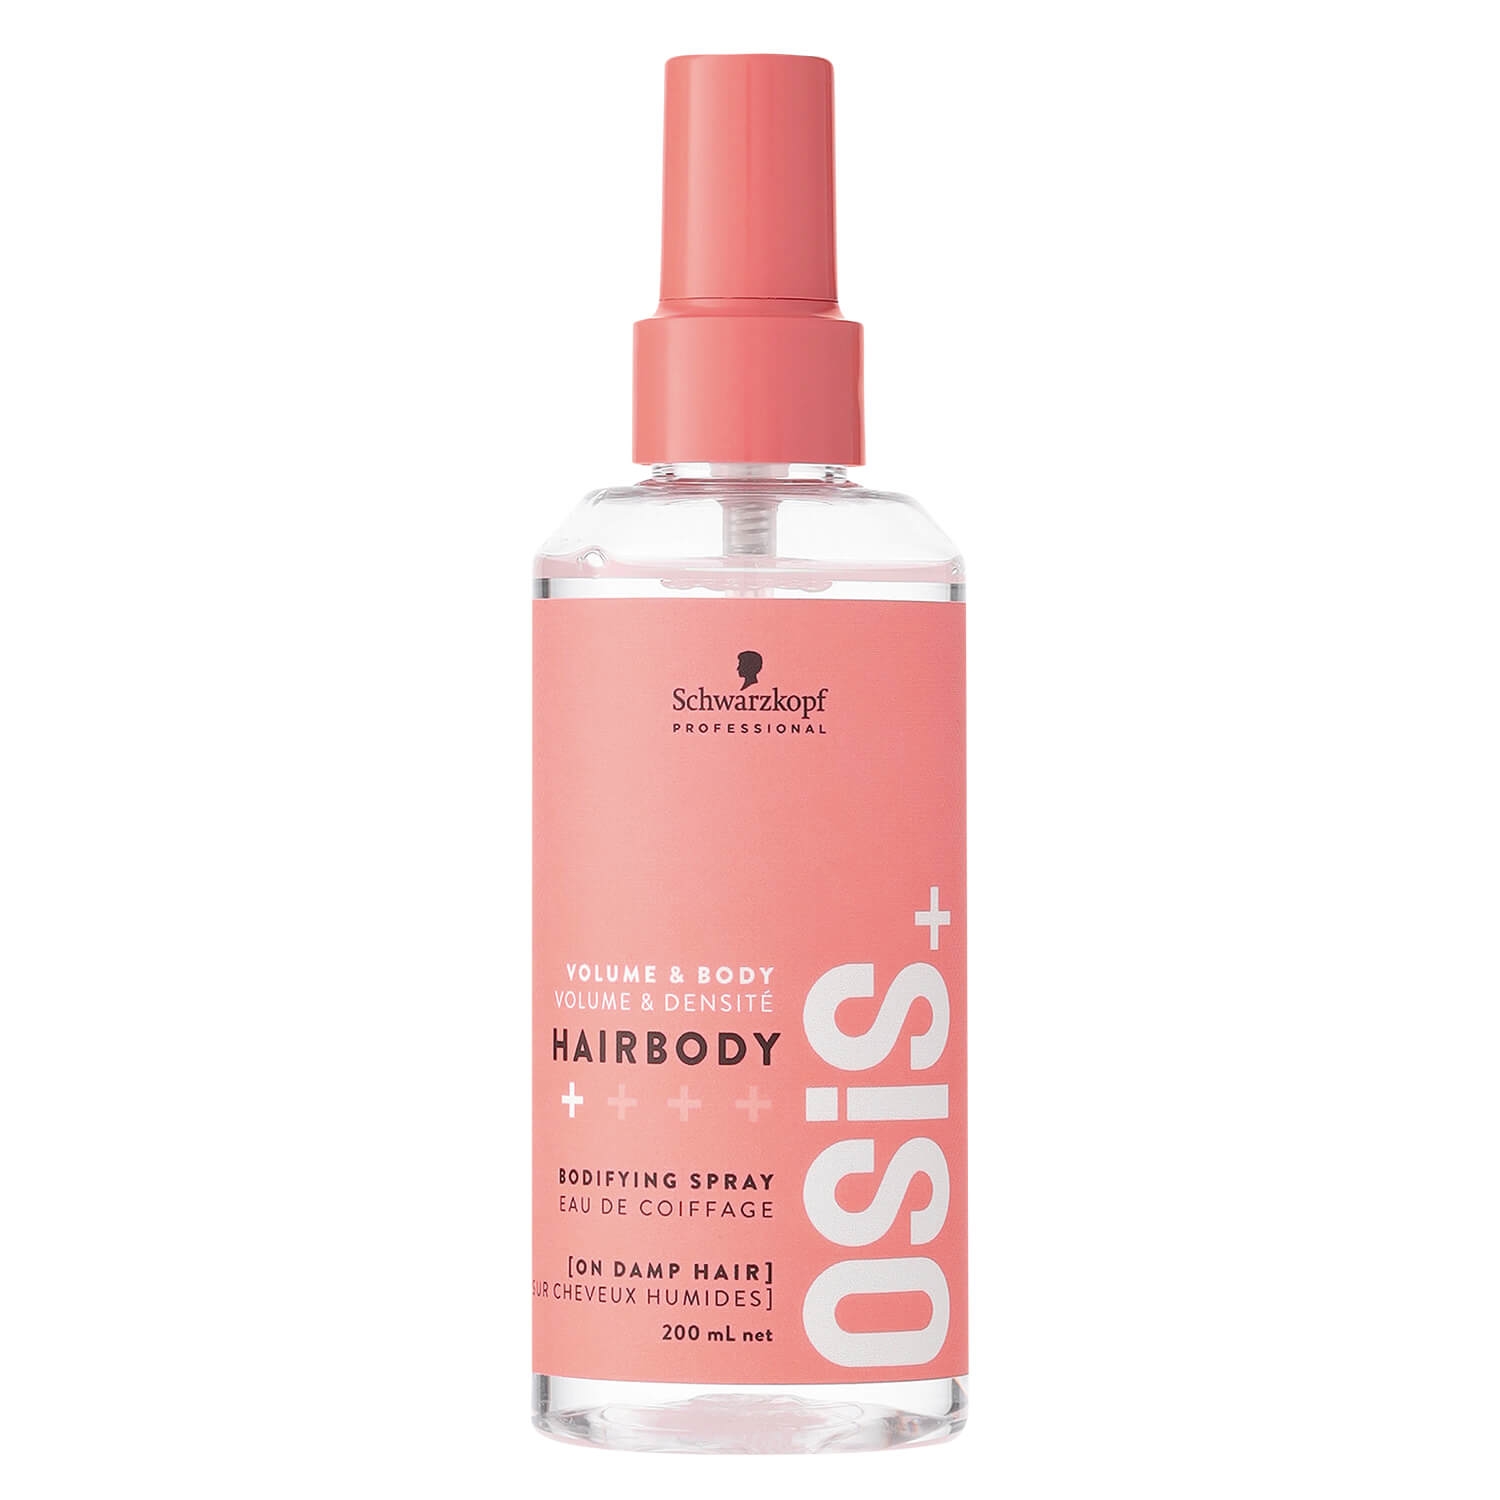 Product image from Osis - Hairbody Volume & Body